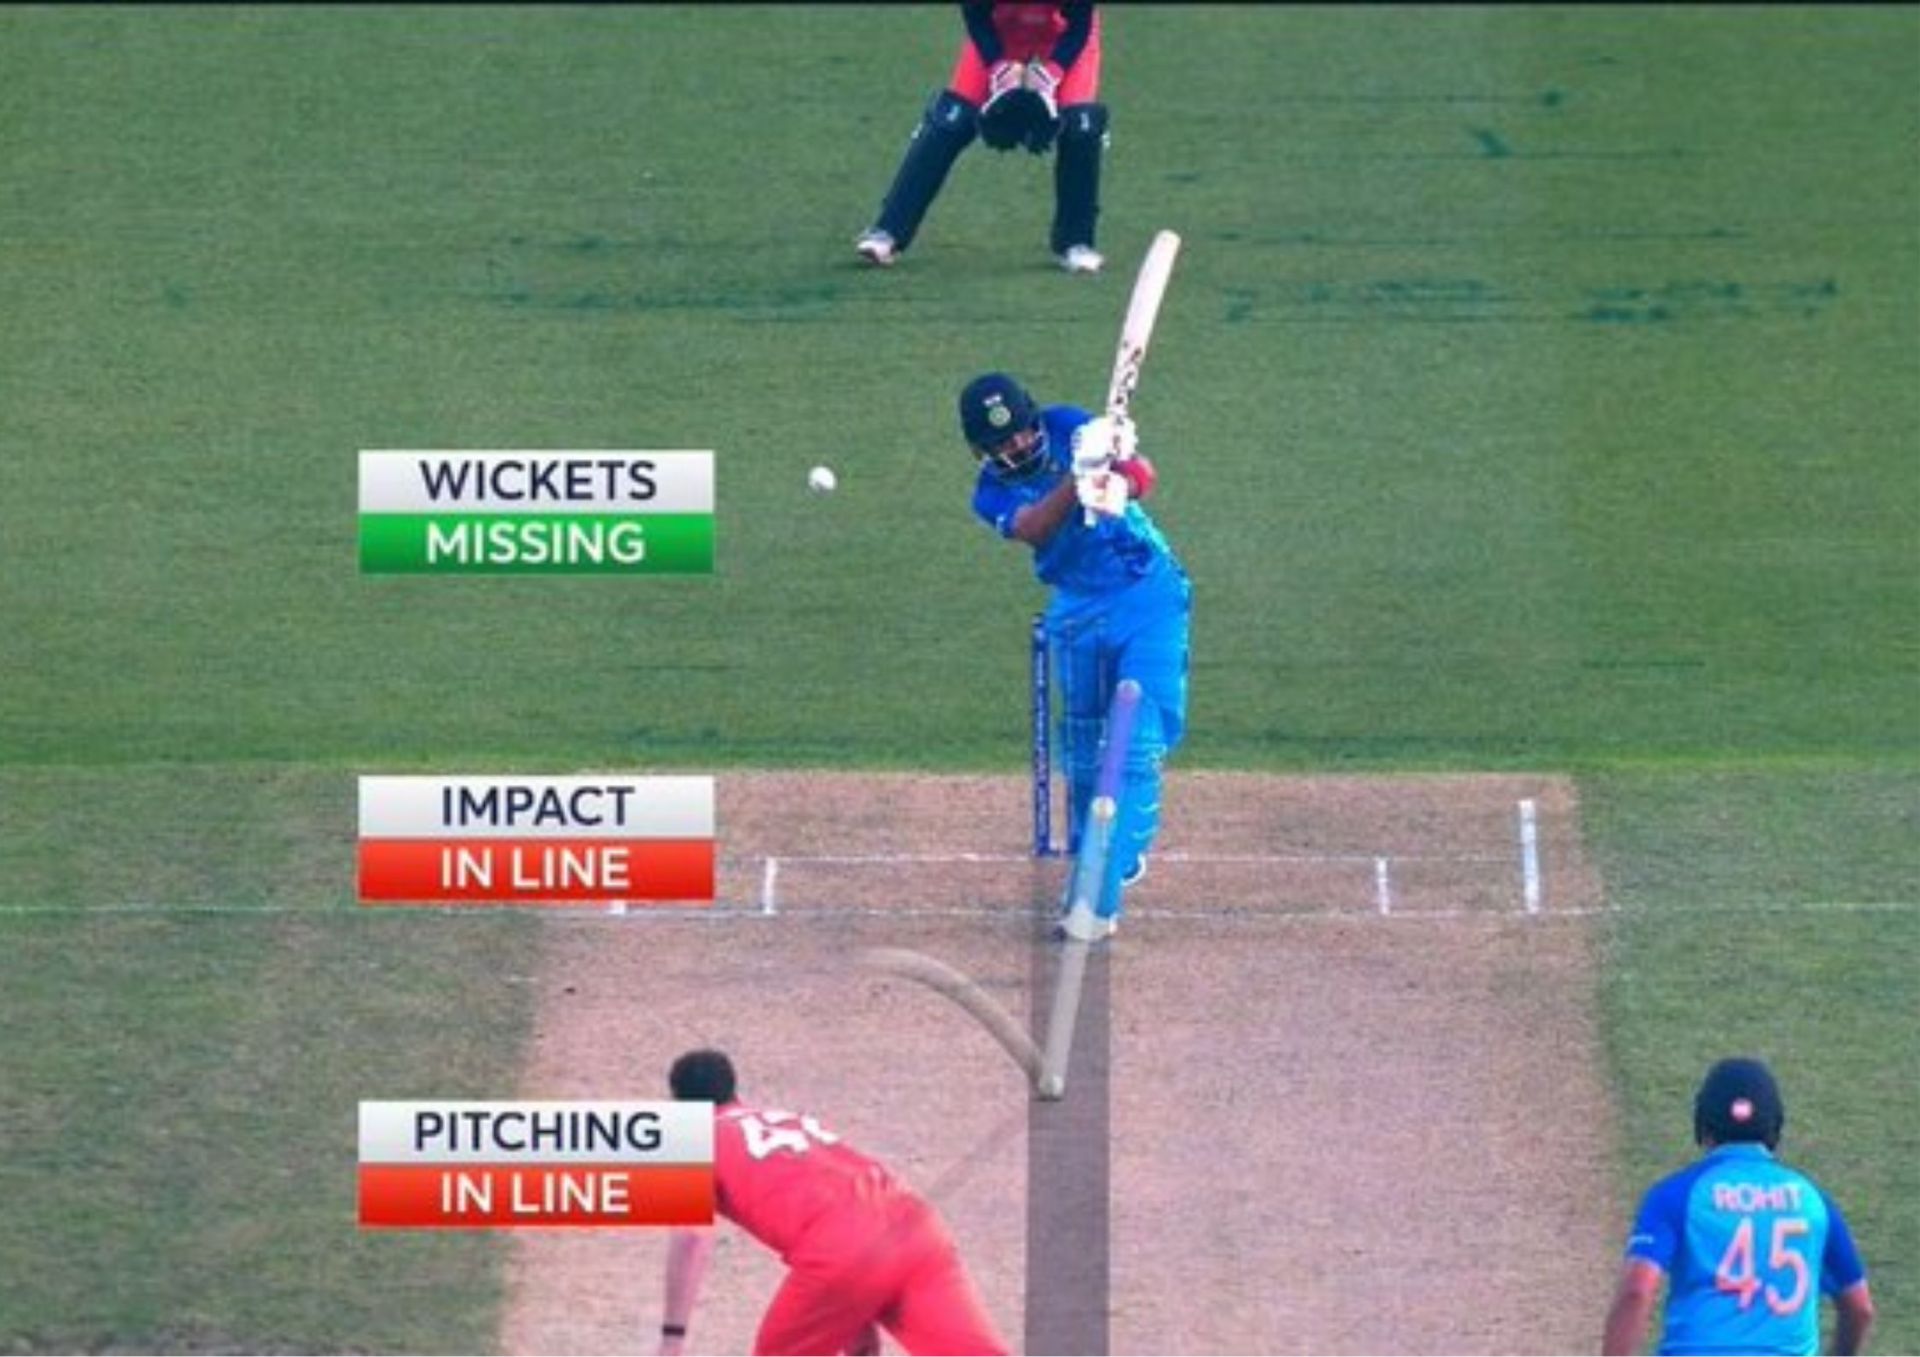 KL Rahul not reviewing the LBW decision backfired and he fell for just 9 off 12 deliveries against The Netherlands in the T20 World Cup clash (Screengrab from Hotstar via Twitter)